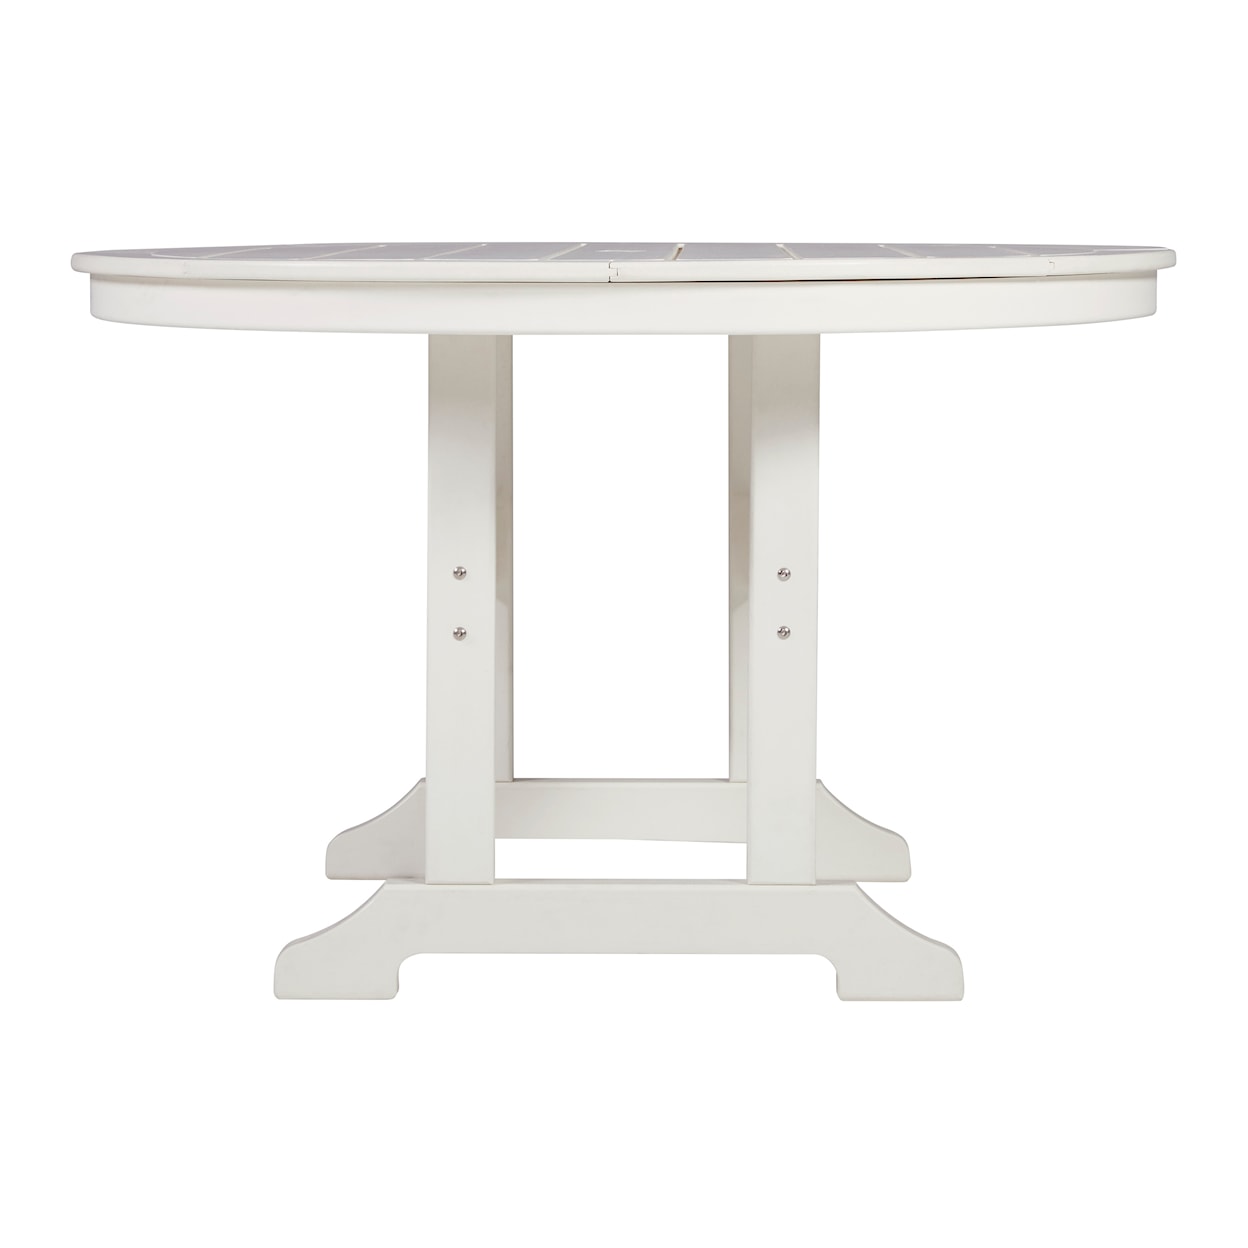 Signature Design Crescent Luxe Outdoor Dining Table